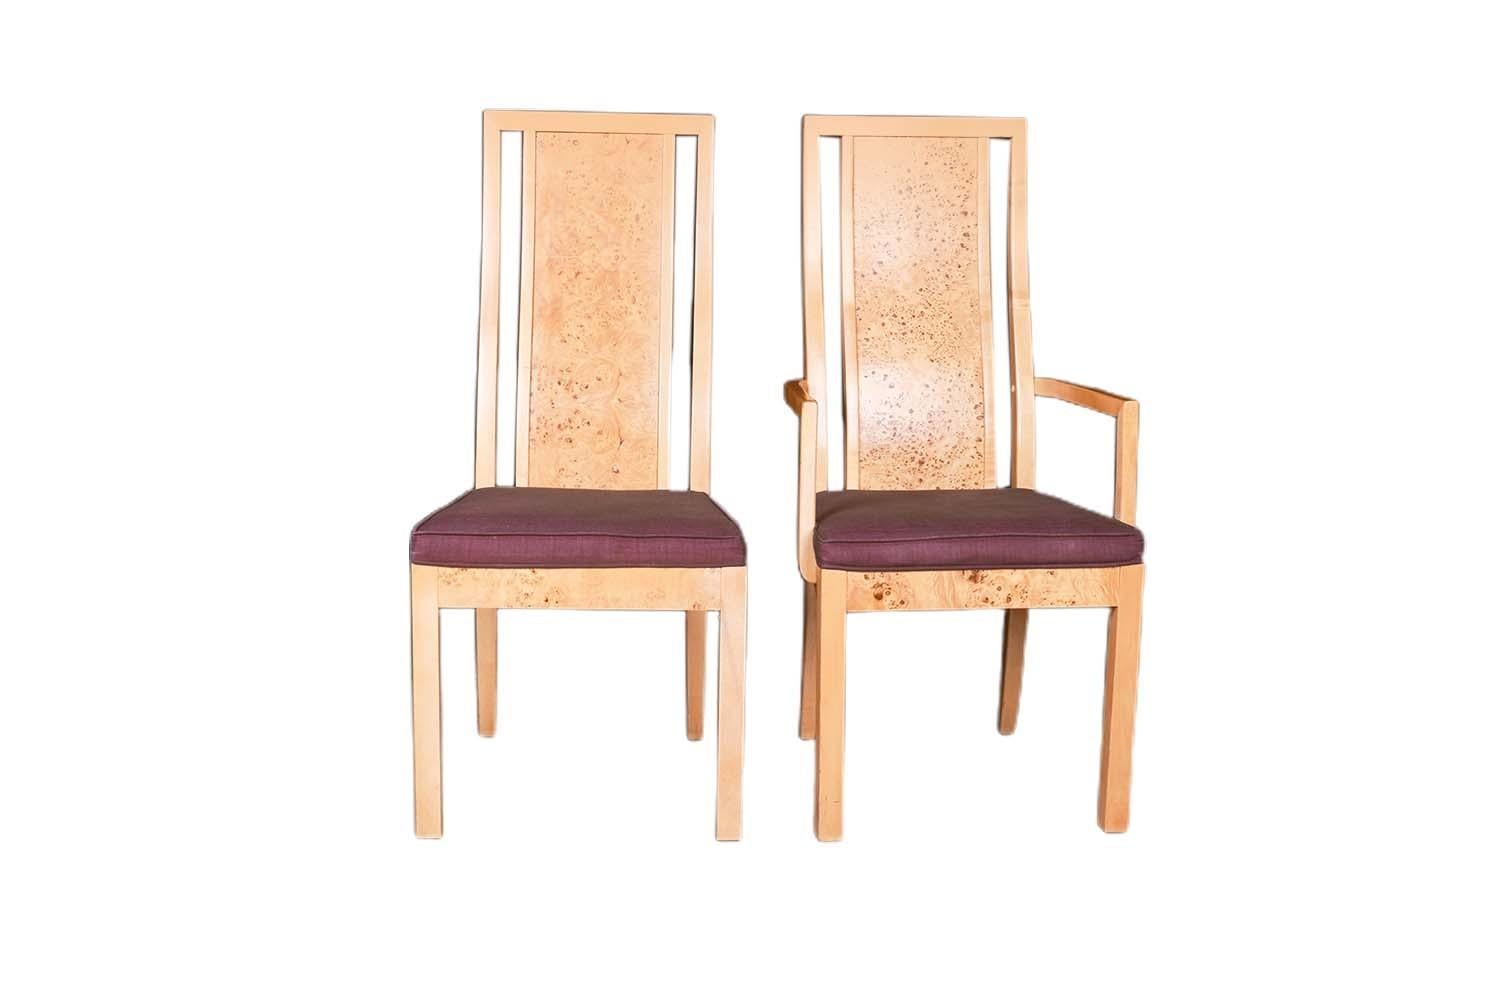 Upholstery Burl Wood Dining Chairs Mid Century Milo Baughman Style